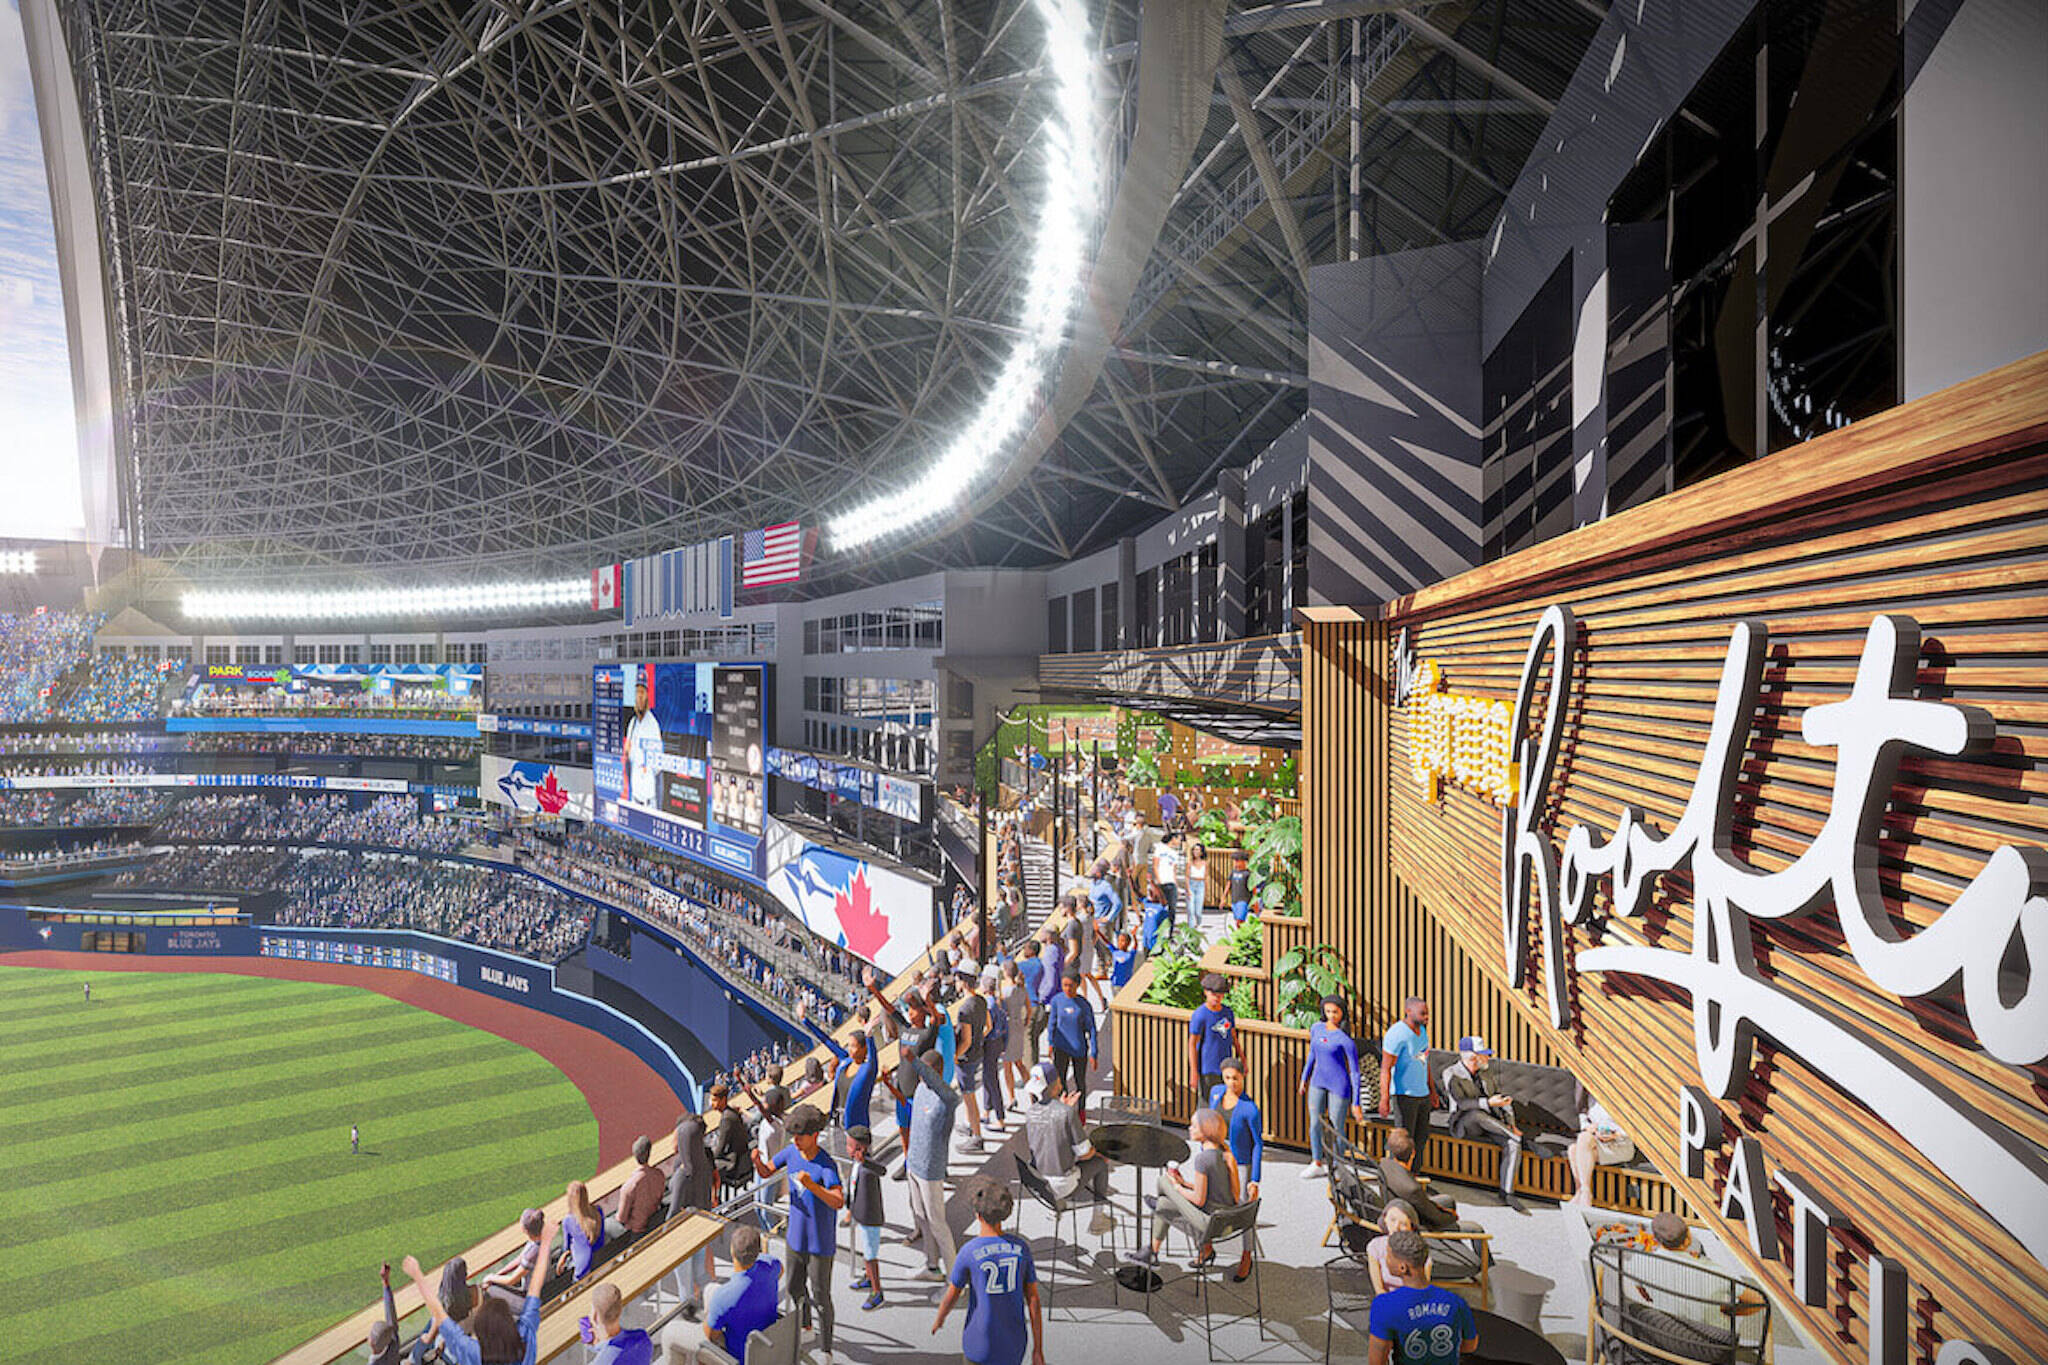 The Rogers Centre in Toronto is getting a brand new rooftop patio oasis